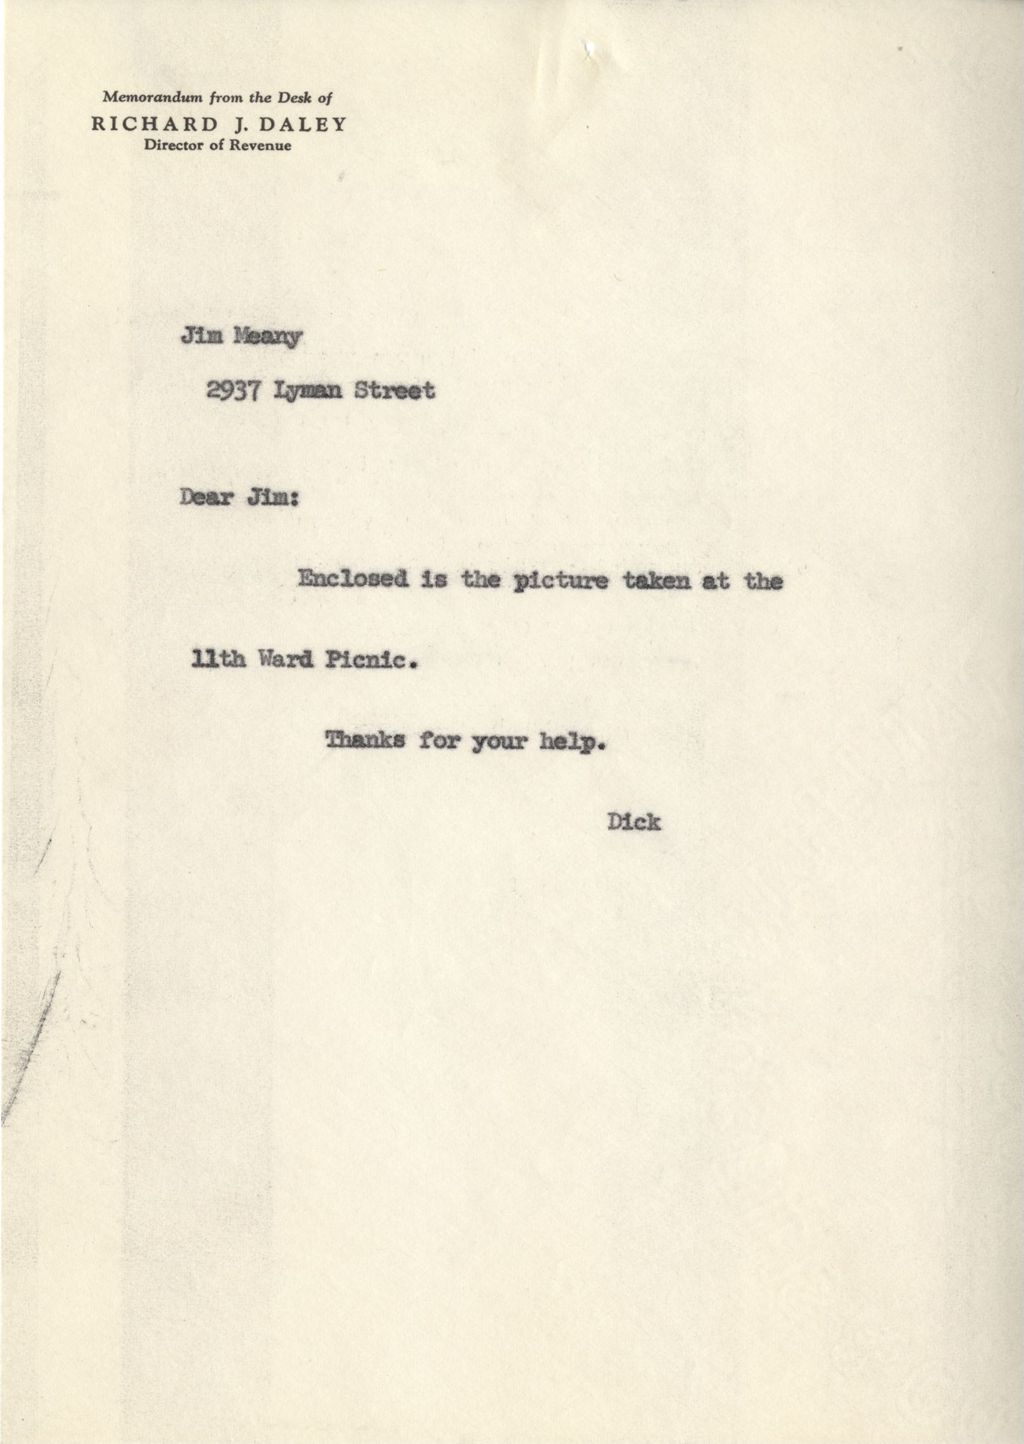 Memo from Richard J. Daley to Jim Meany